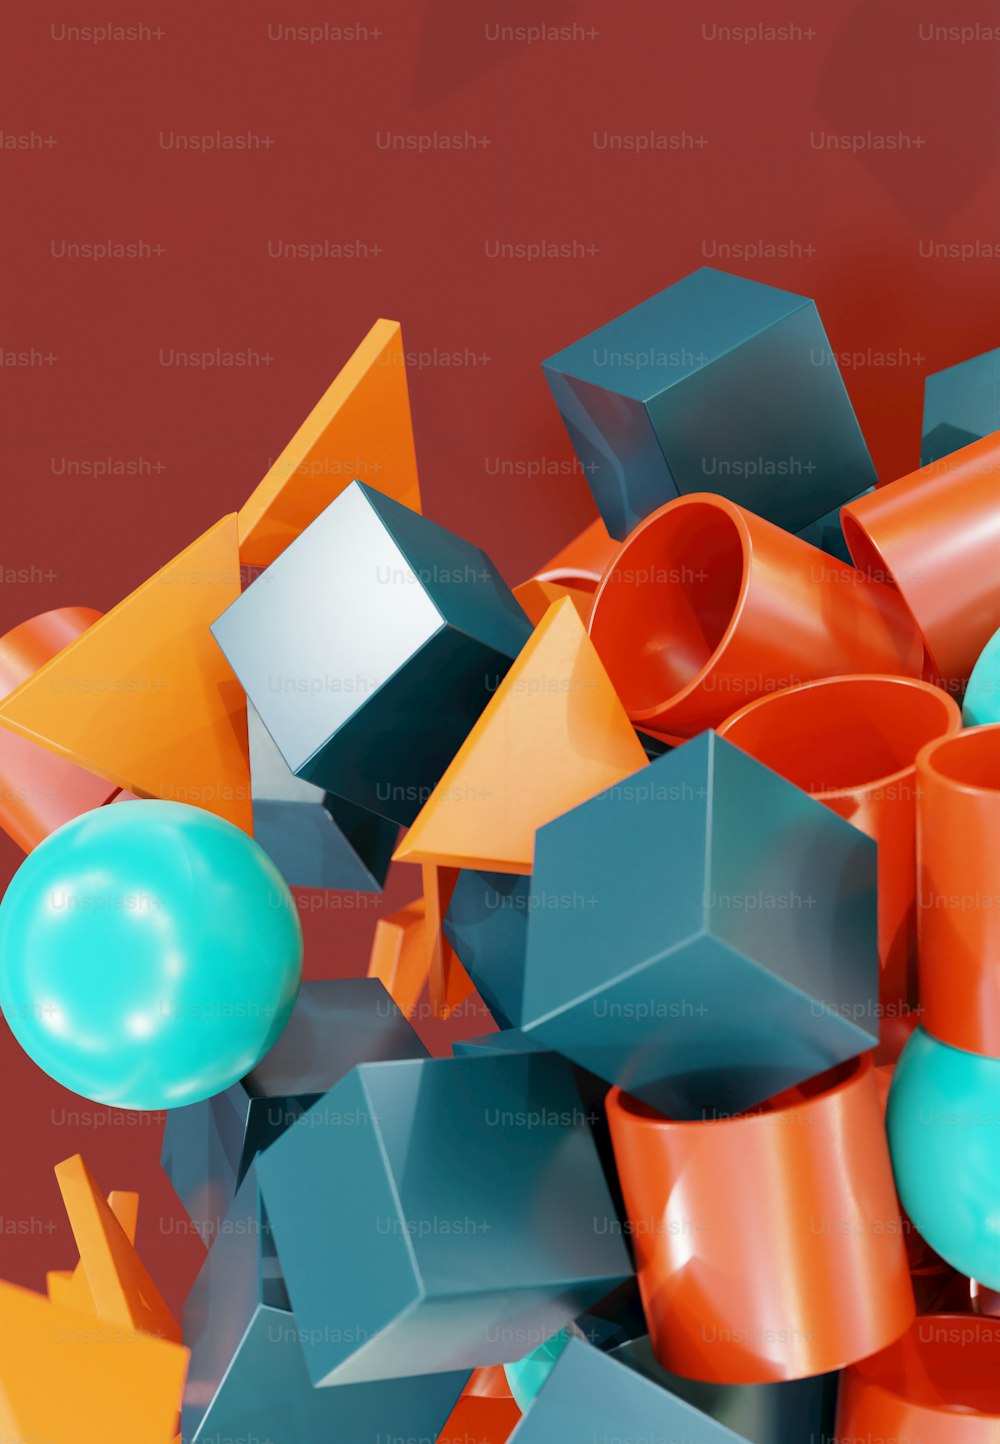 a pile of orange and blue objects on a red background